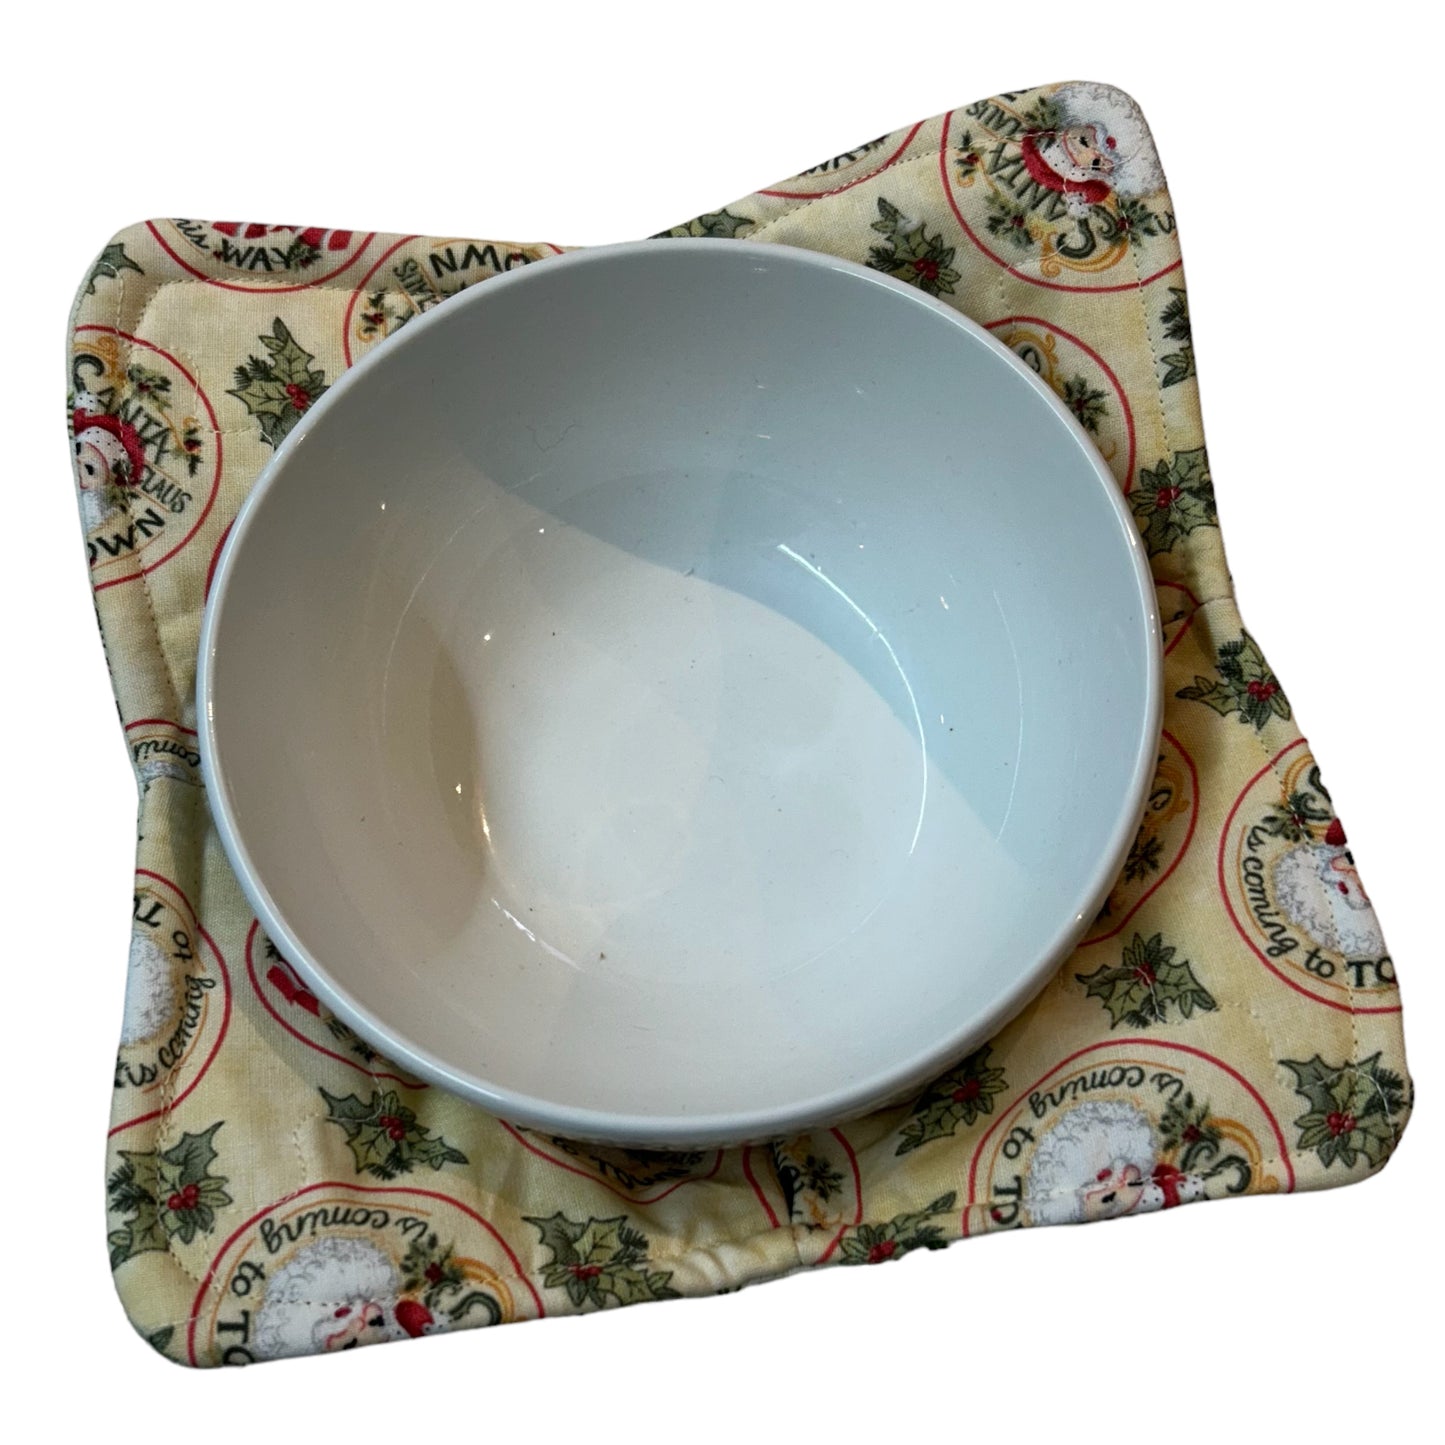 Soup bowl cozy for microwave made with 100% cotton fabric. Featuring vintage Santa and Snowman print fabric and Pellon Wrap and Zap batting. Sewn with cotton thread this Soup Bowl Hug can be used in the Microwave.